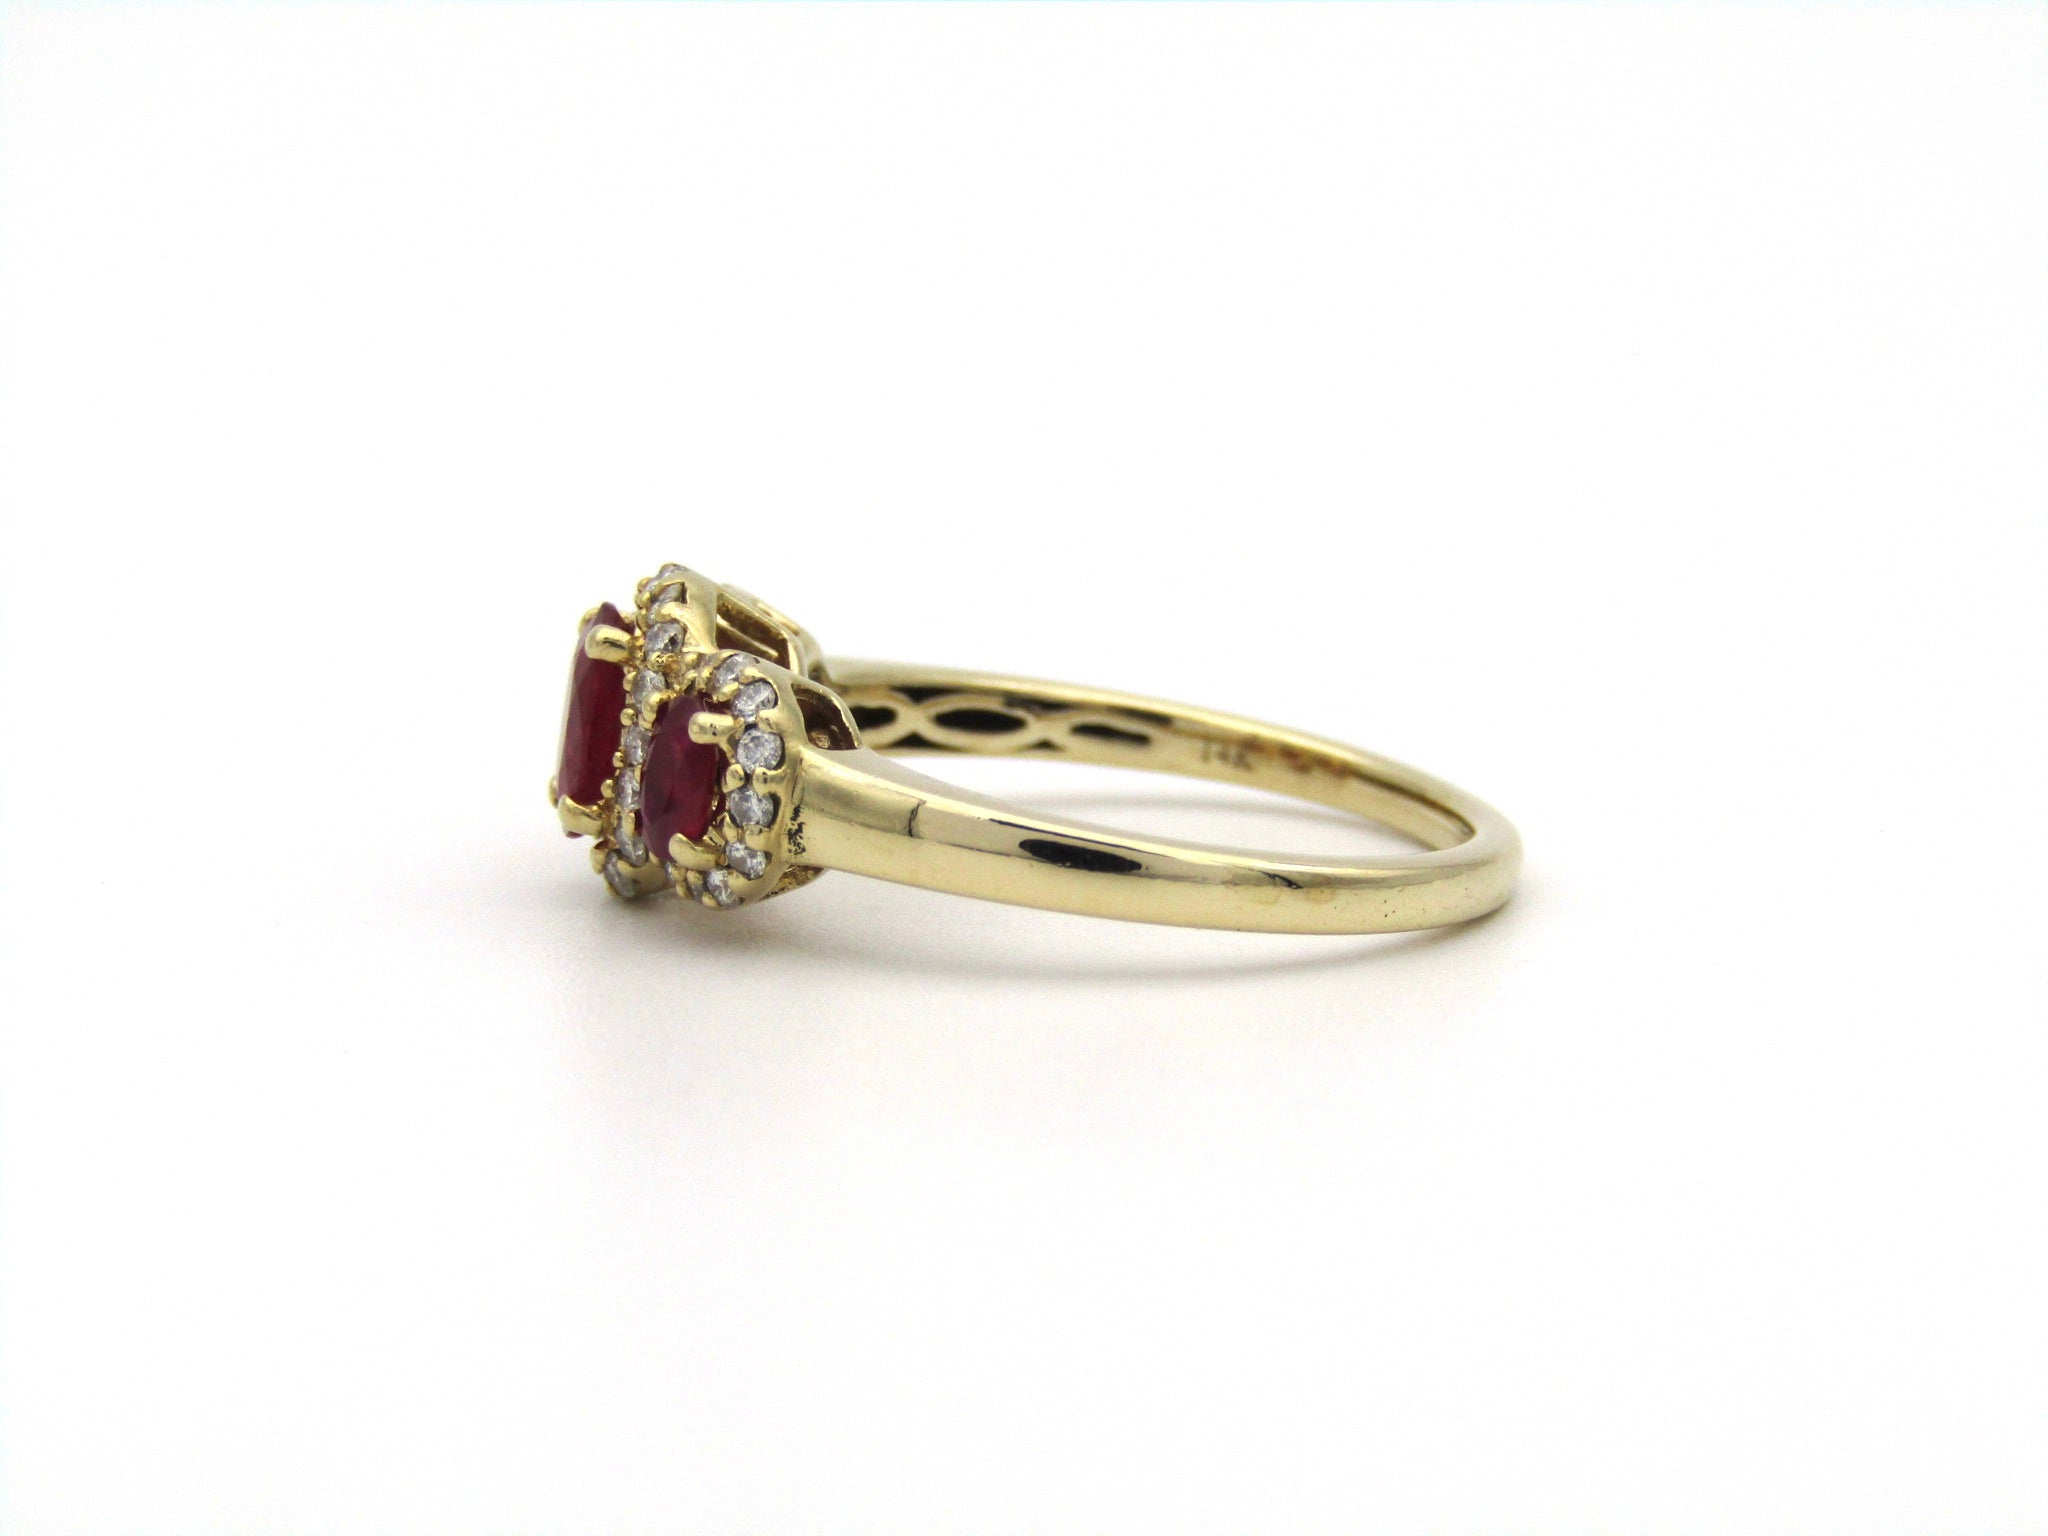 14K gold ruby and diamond ring.